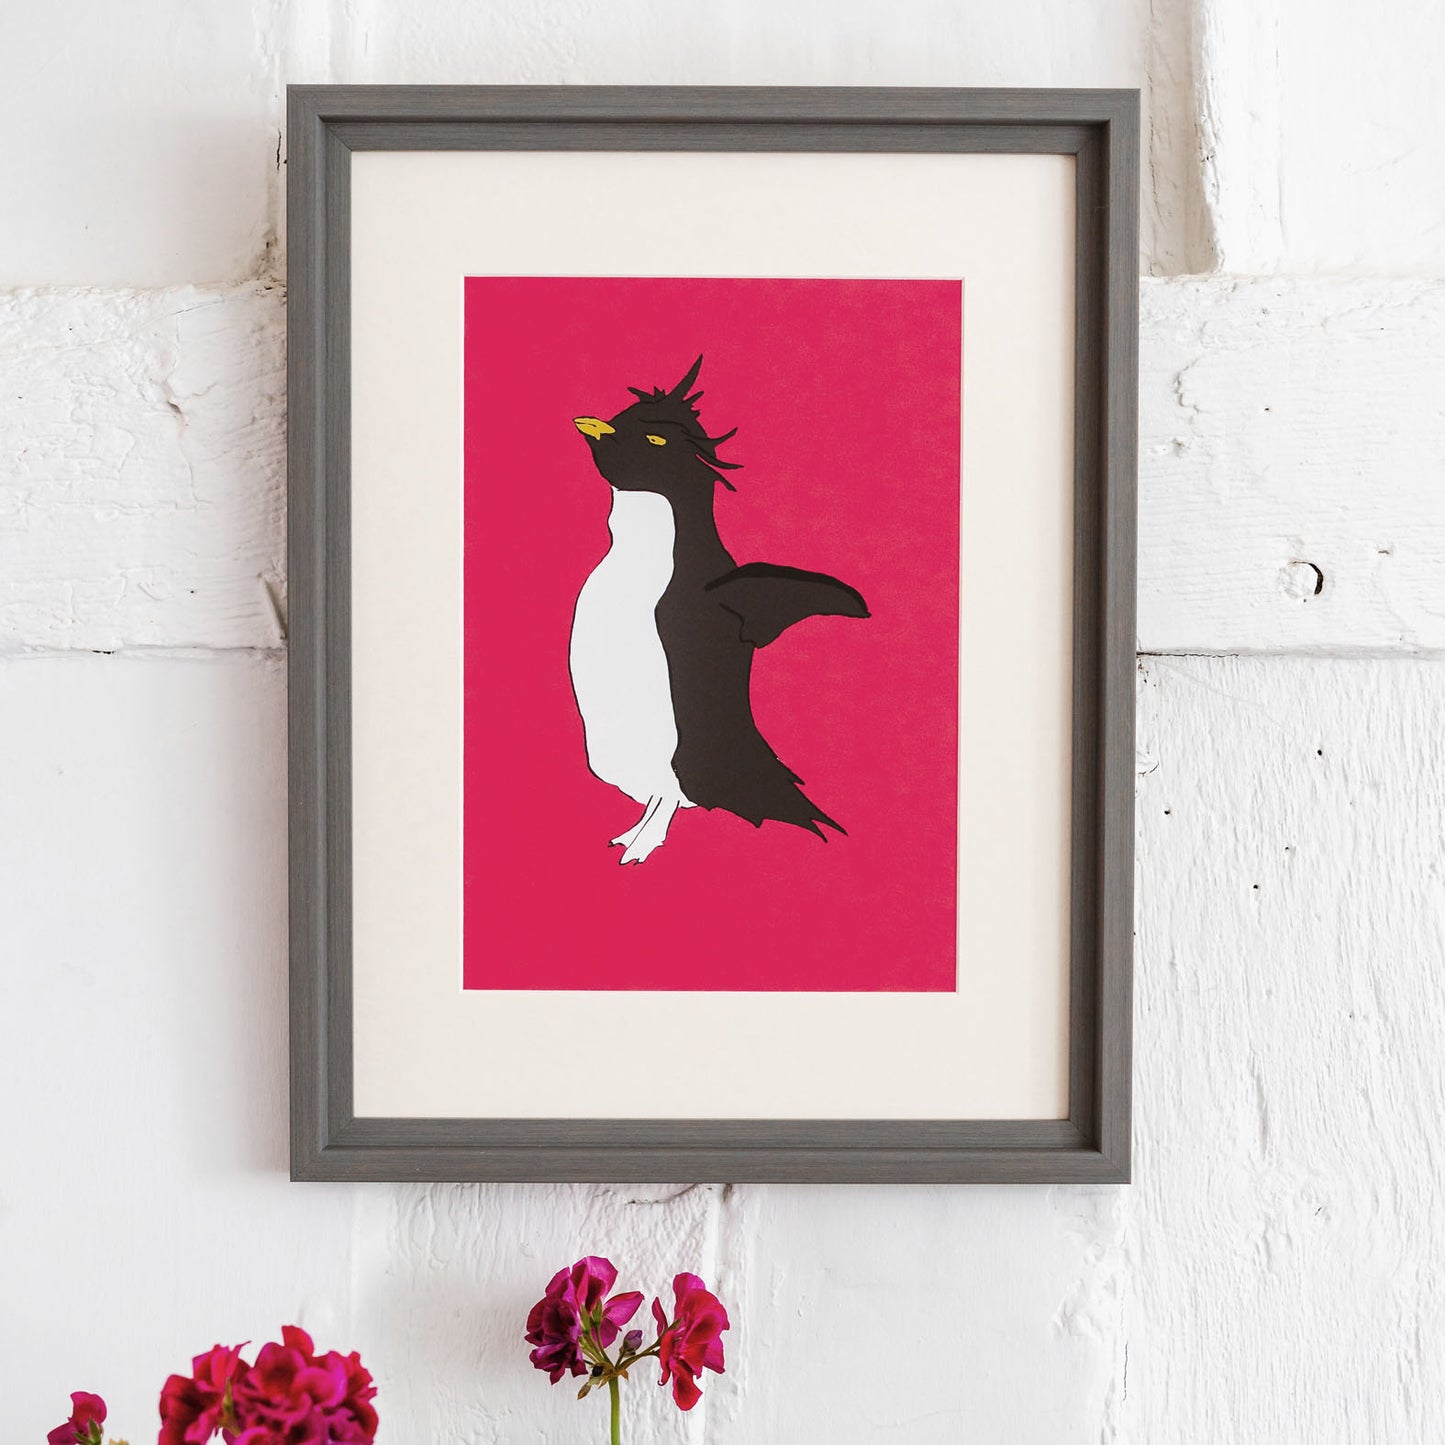 giclee print of a rockhopper penguin with a pink background